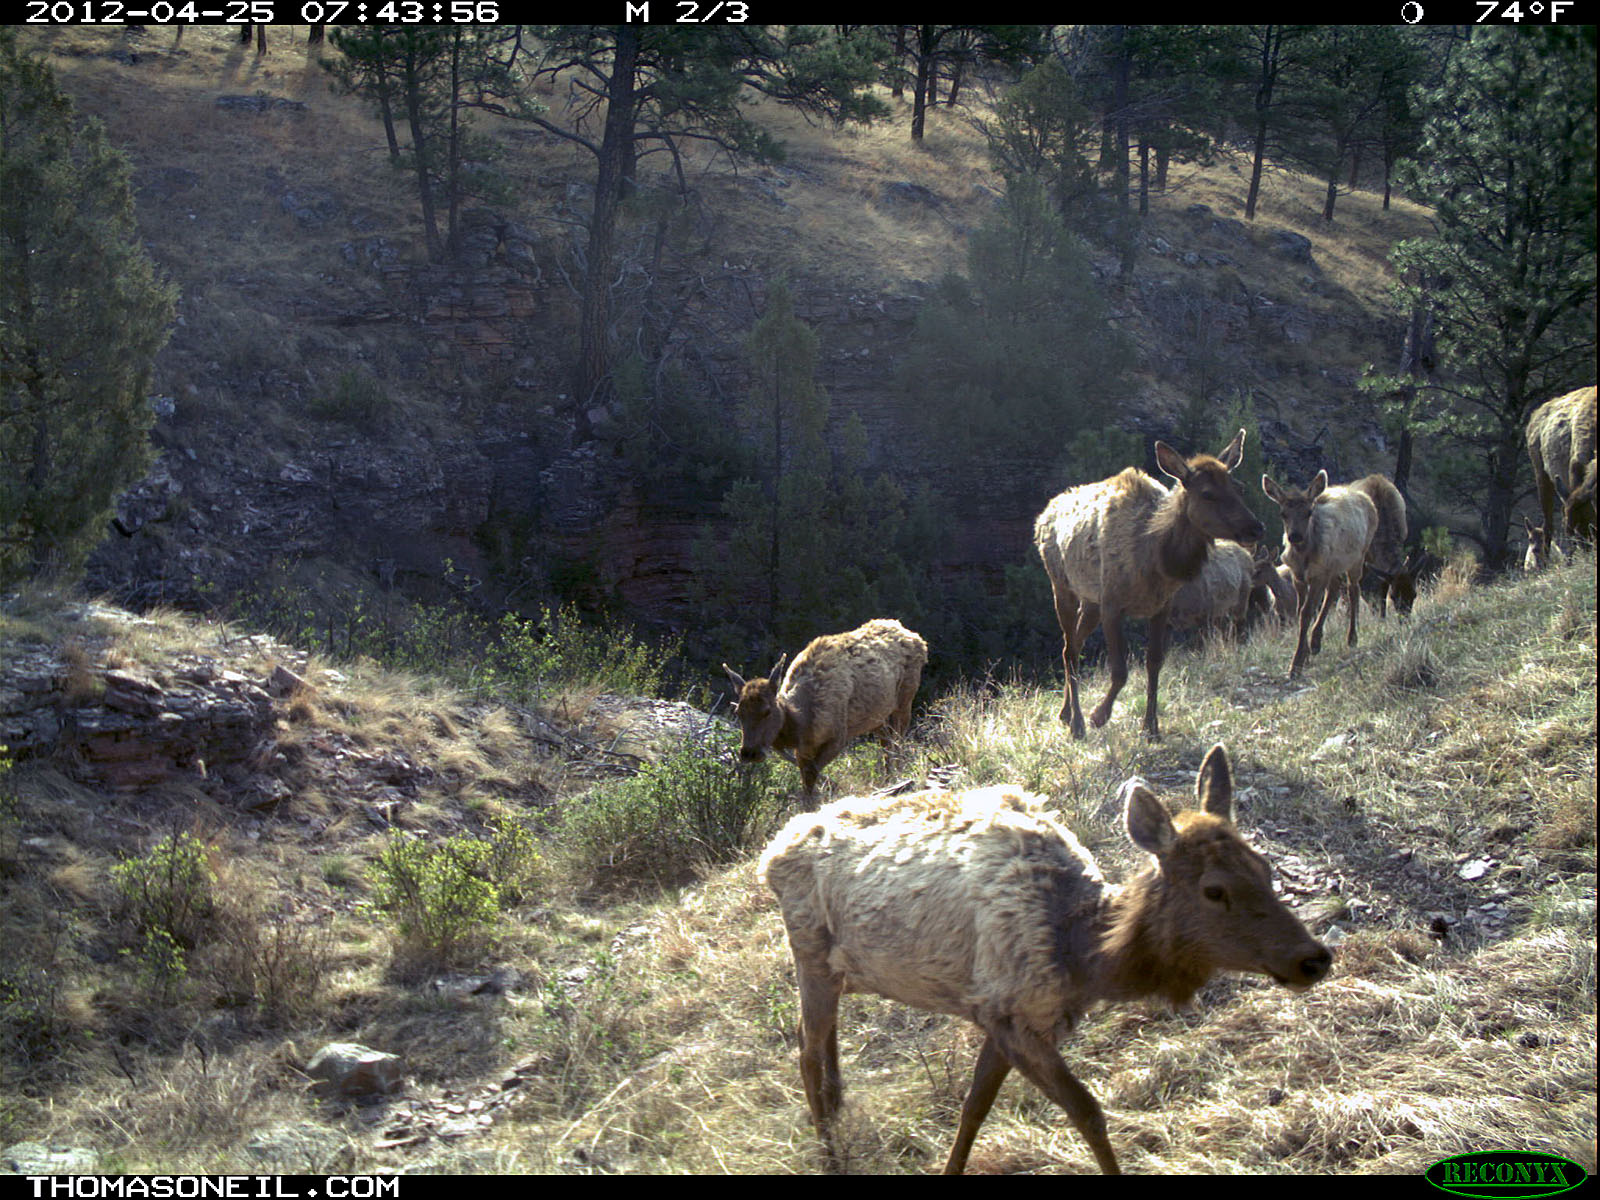 Trailcam picture of elk, Wind Cave National Park, April 25.  Click for next photo.